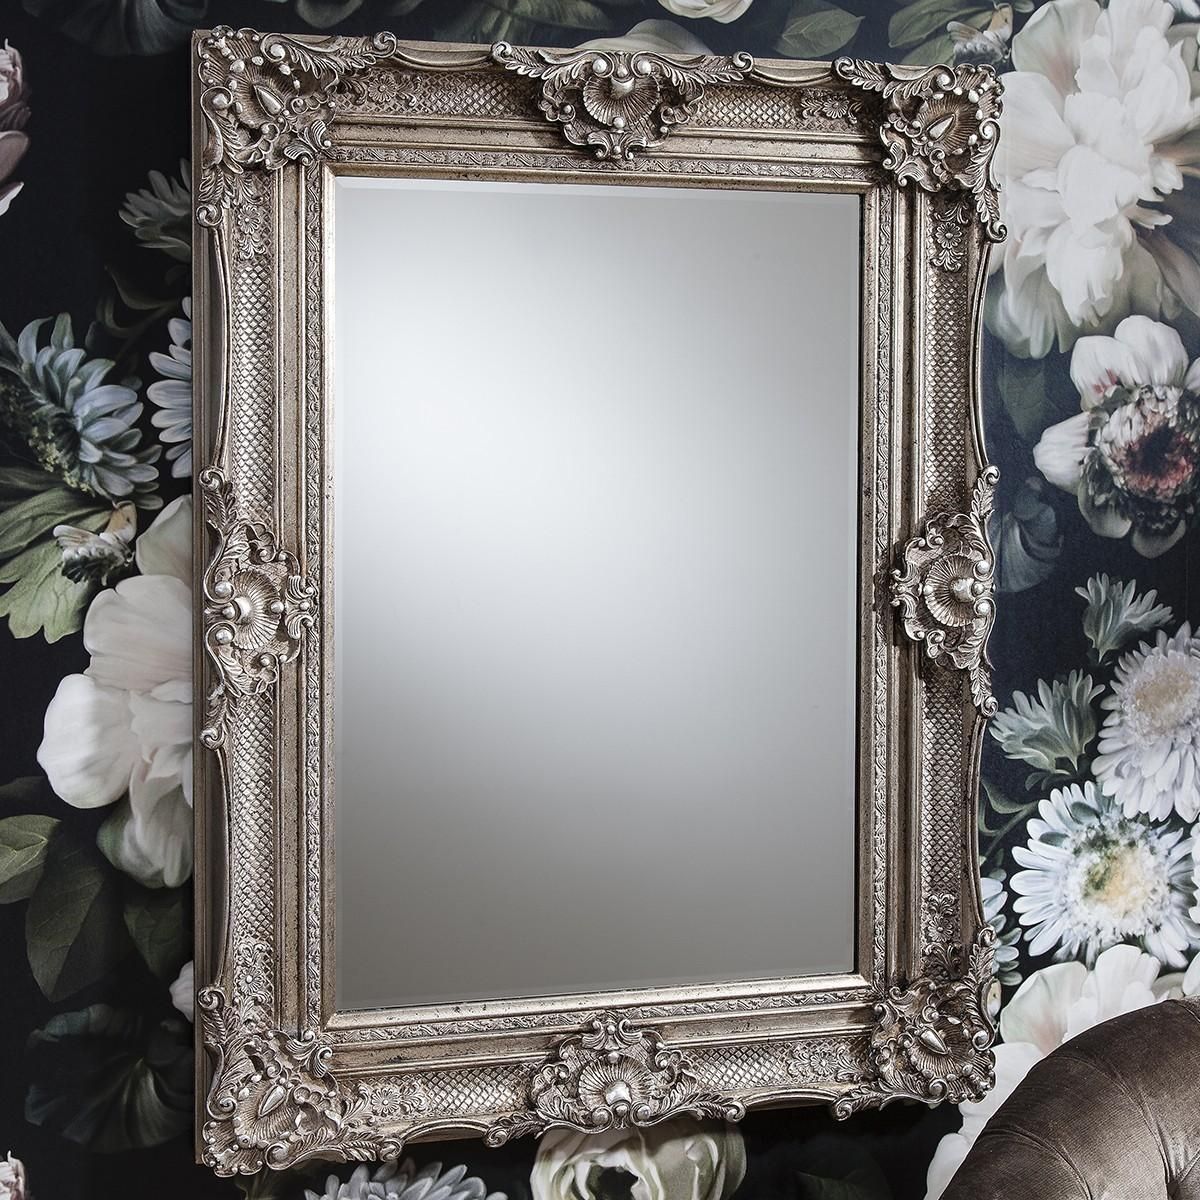 Devere Baroque Mirror From £249 – Luxury Wall Mirrors | Ashden Road Intended For Baroque Mirror Silver (View 4 of 20)